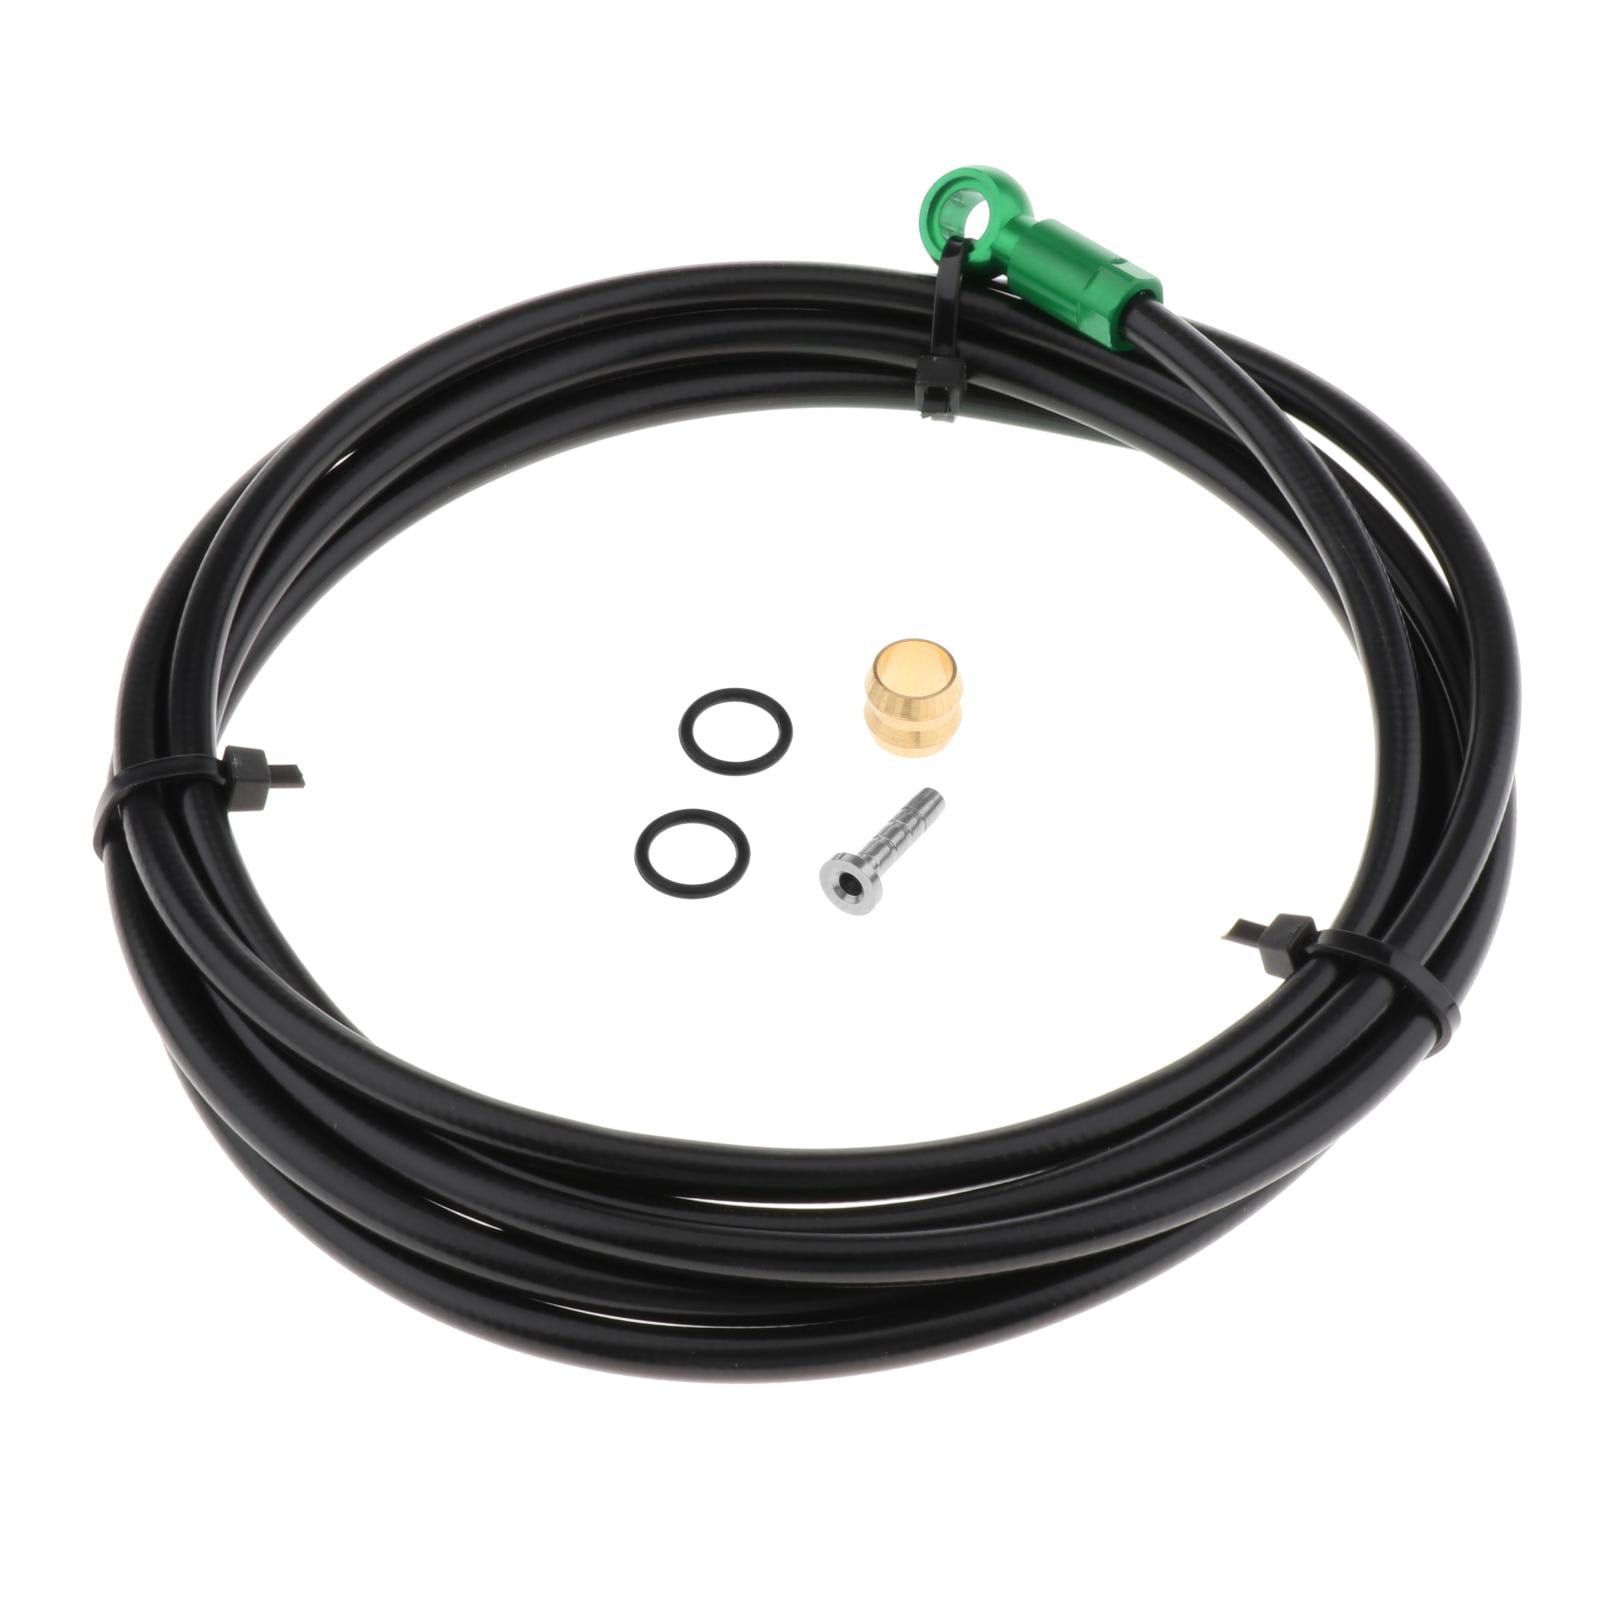 Details about   Durable Bike Hydraulic Disc Brake Hose Tube with Olive Connector Inserts Set NEW